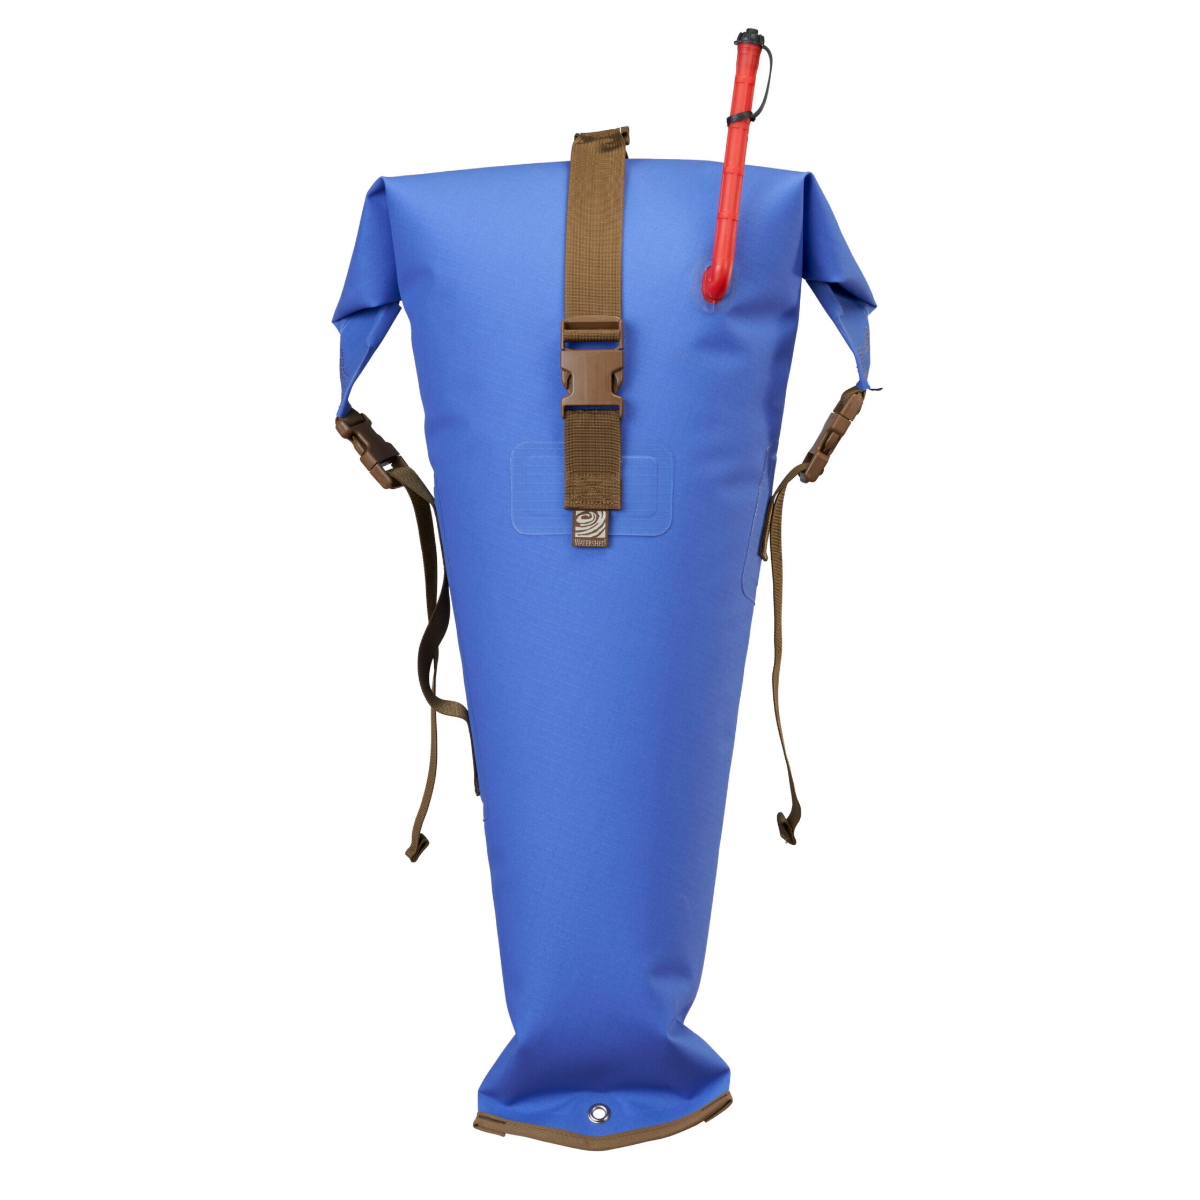 Featuring the Futa Kayak Stow Float dry bag, kayak flotation, kayak outfitting manufactured by Watershed shown here from one angle.